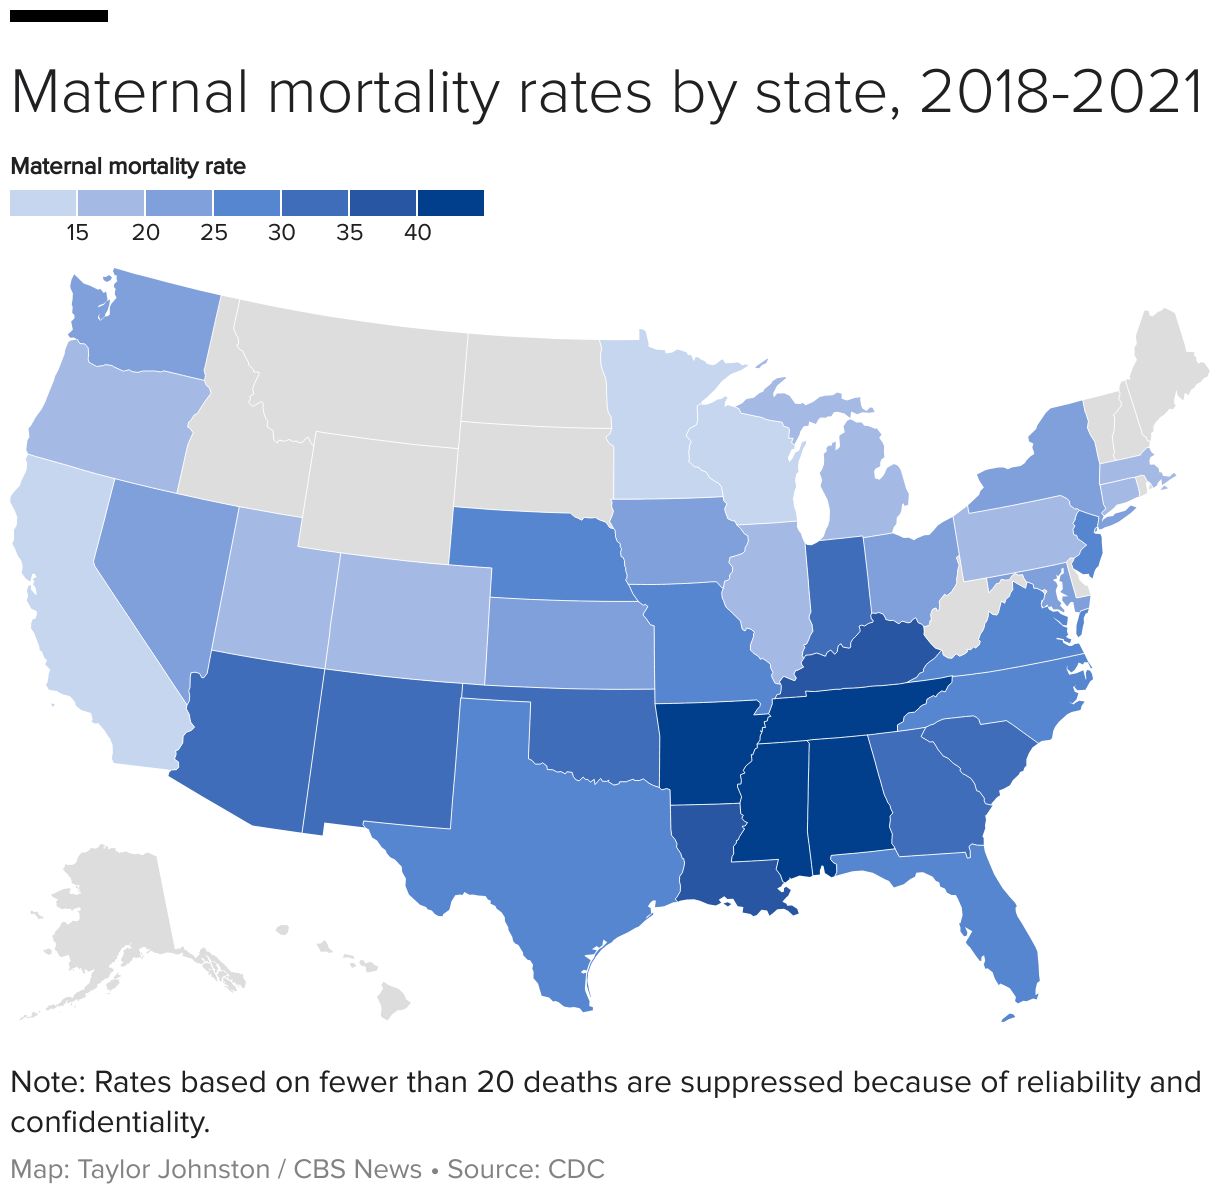 U.S. map showing maternal morality rates by state from 2018 to 2021,